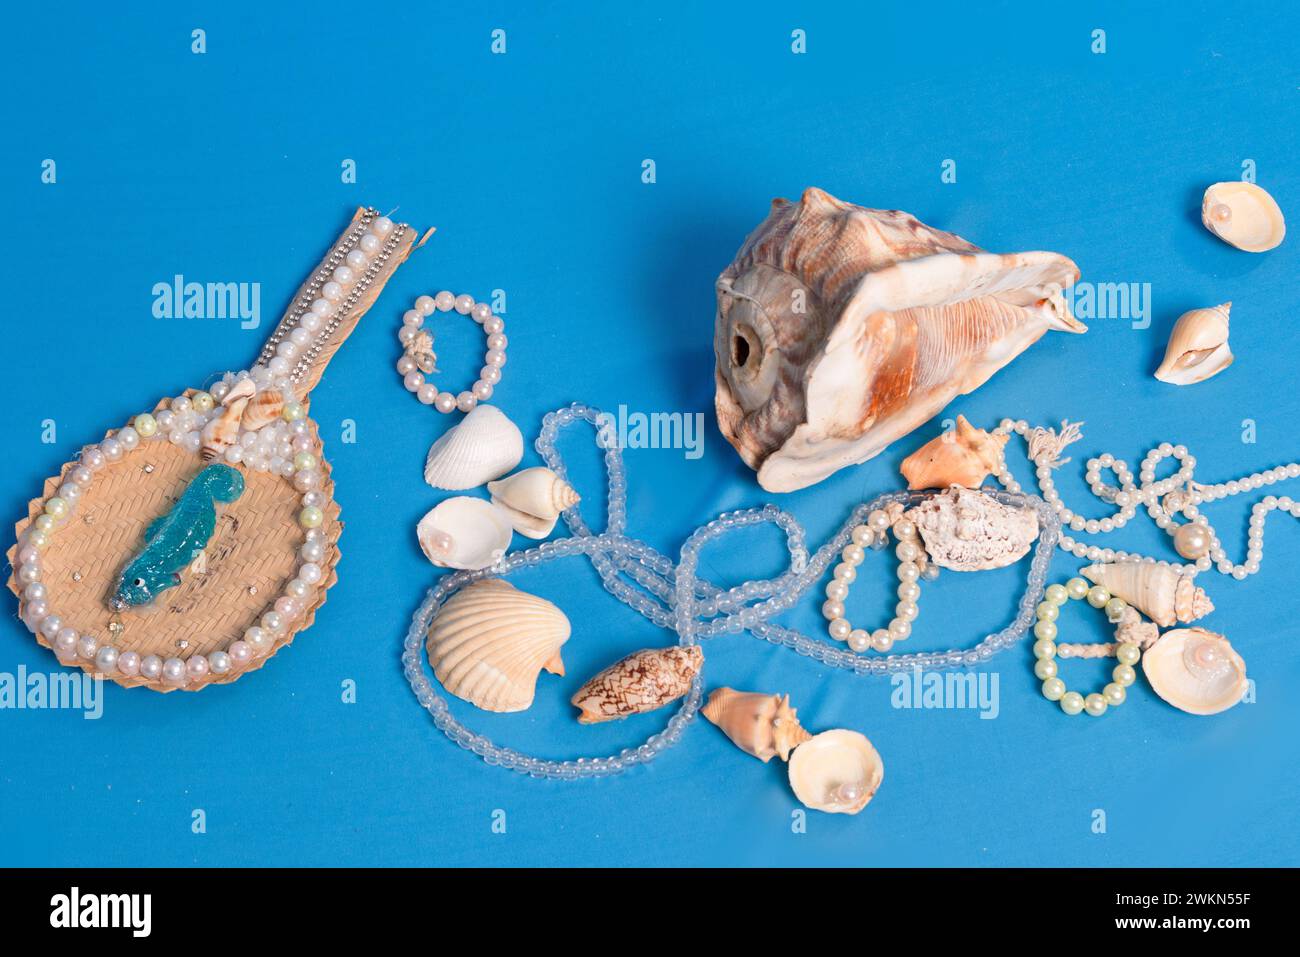 Several sea shells, necklaces and mirror scattered on the blue studio floor. Tribute to iemanja. Stock Photo